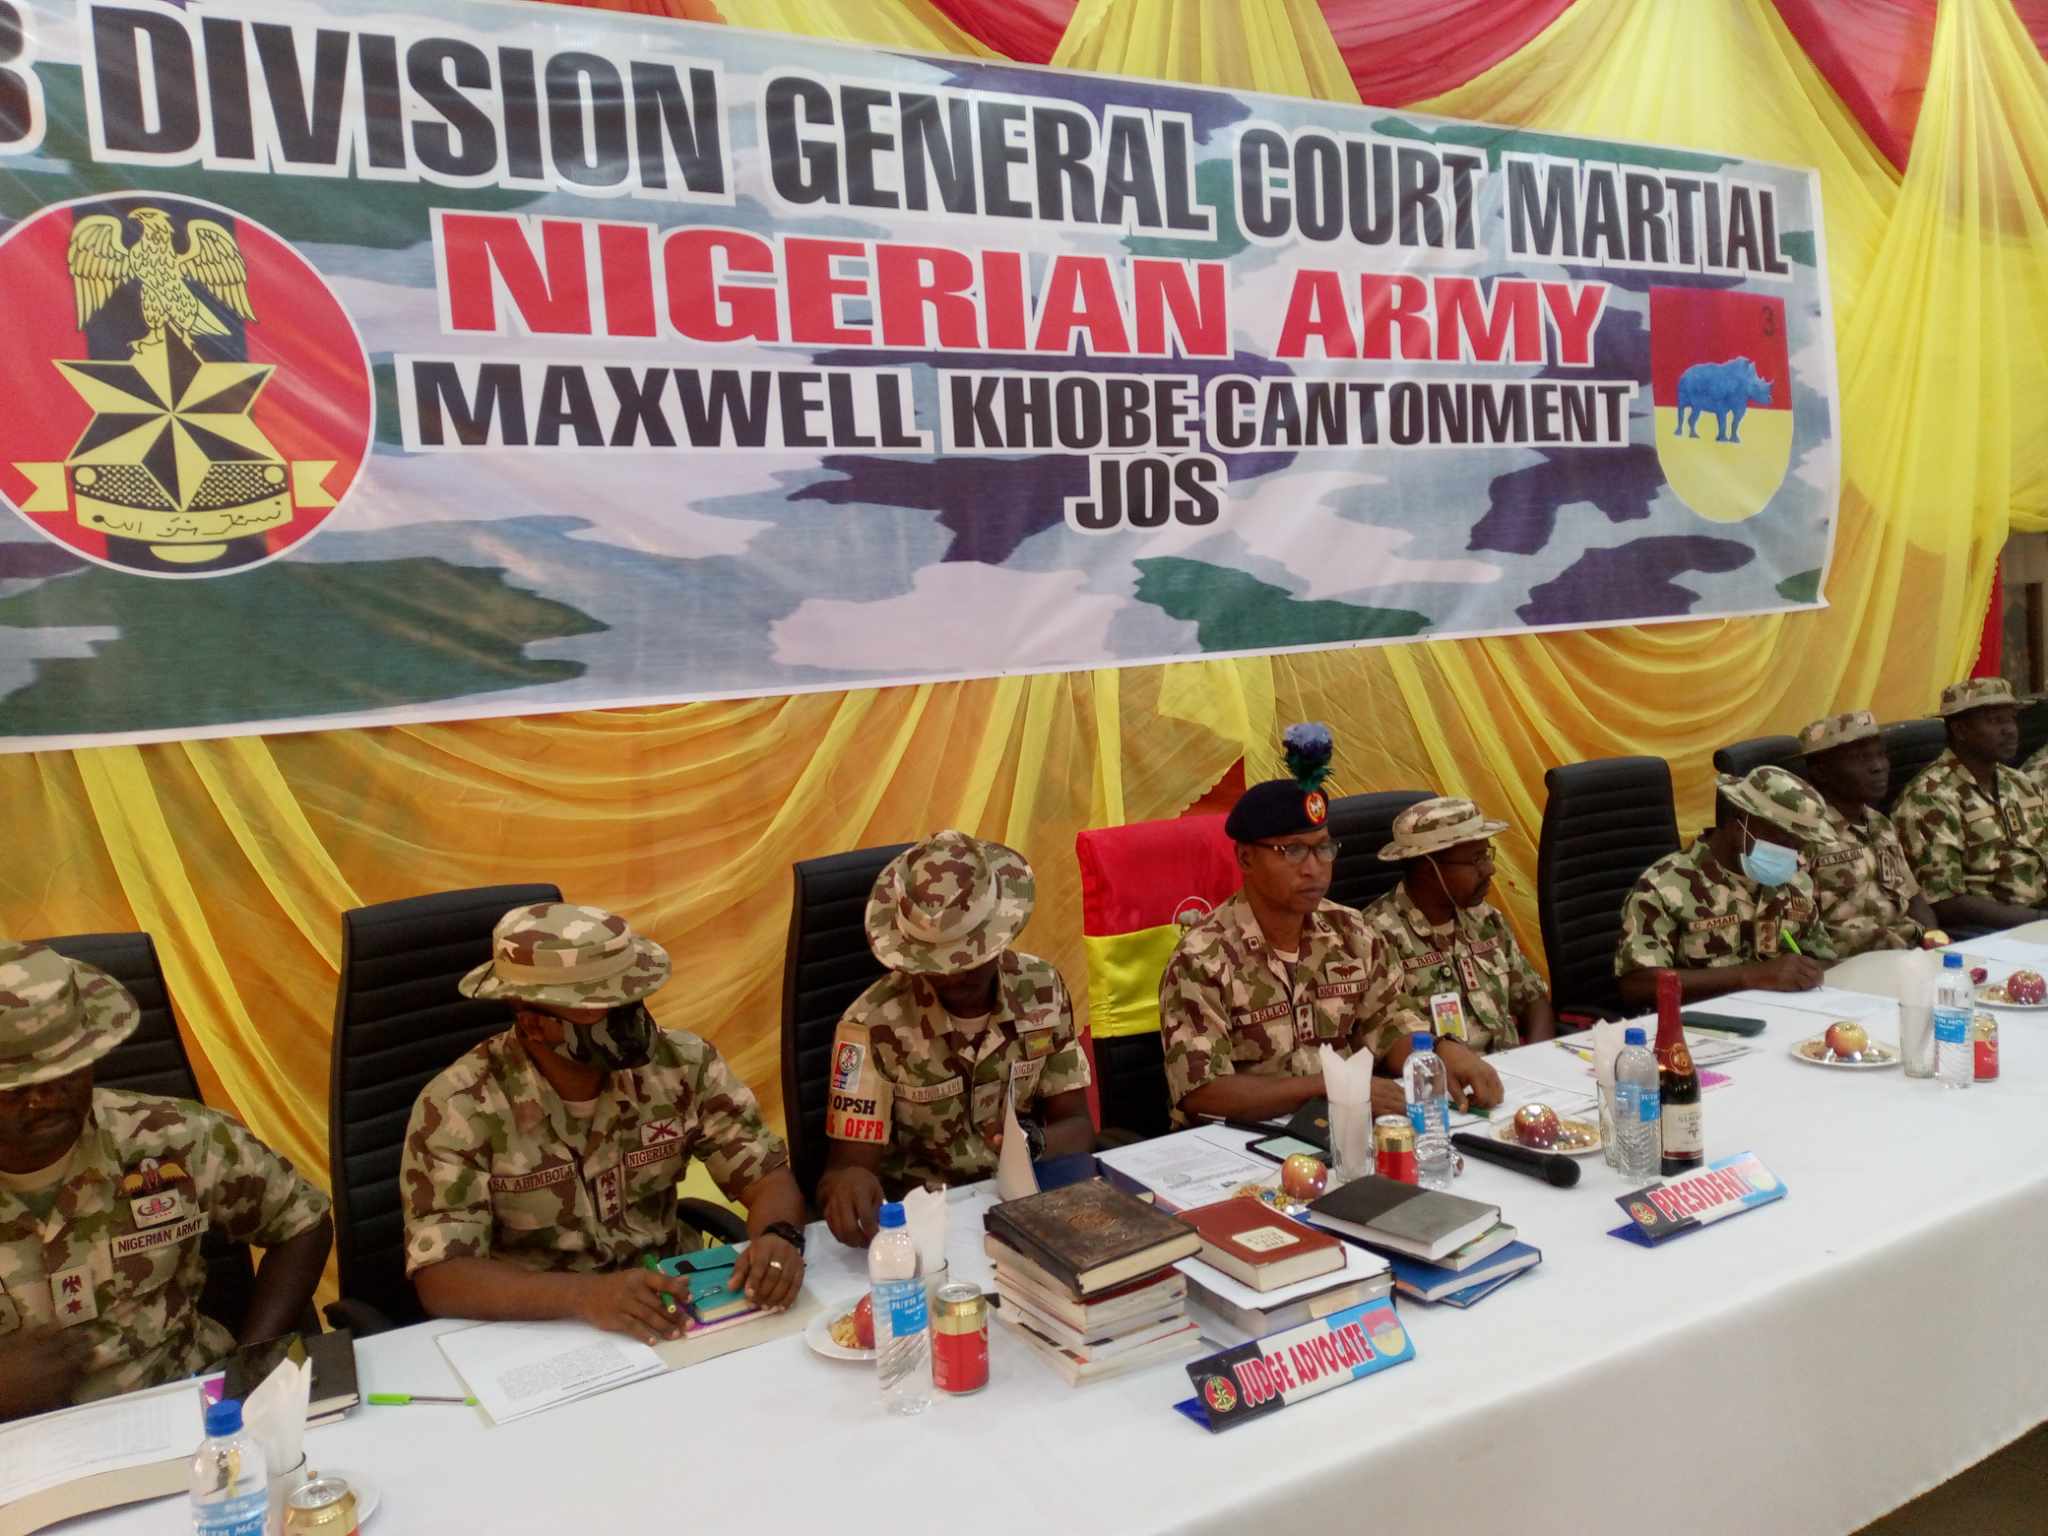 Nigerian Army Reiterates Commitment to Upholding Discipline as 3 Division General Court Martial is Inaugurated